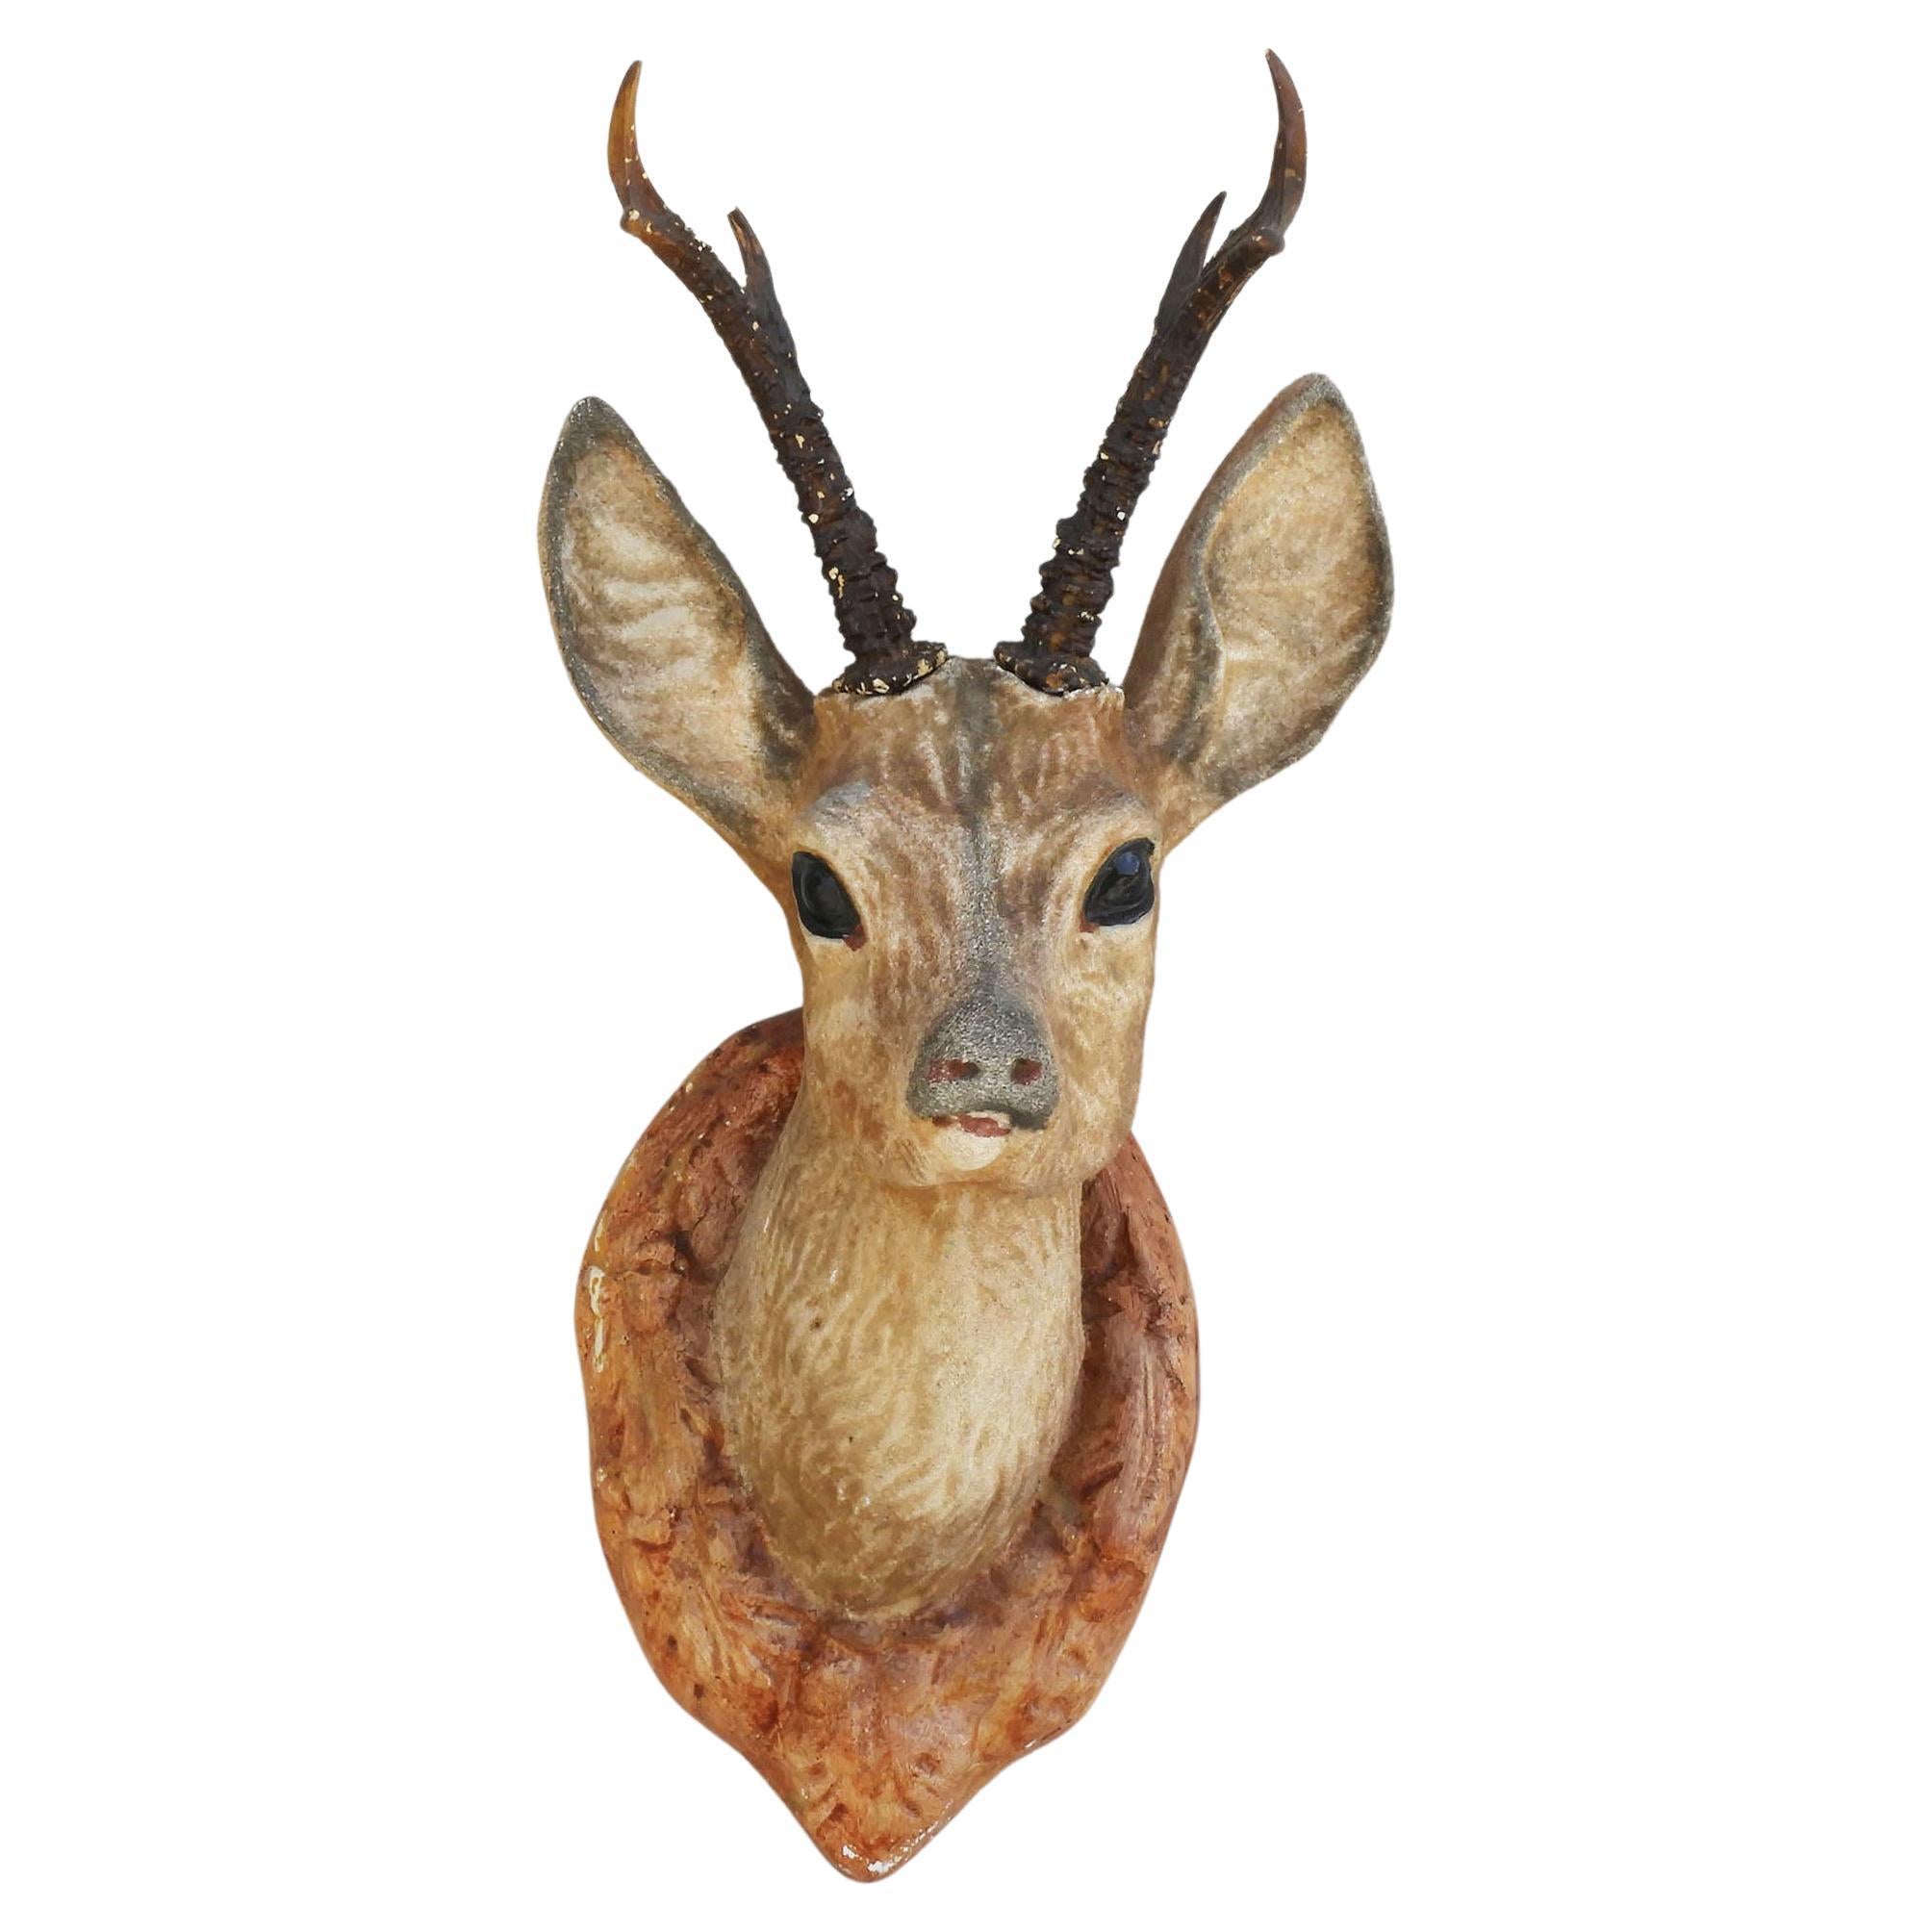 French Vintage Deer Head “Faux Taxidermy” C1950 Decorative Wall Plaque C1950